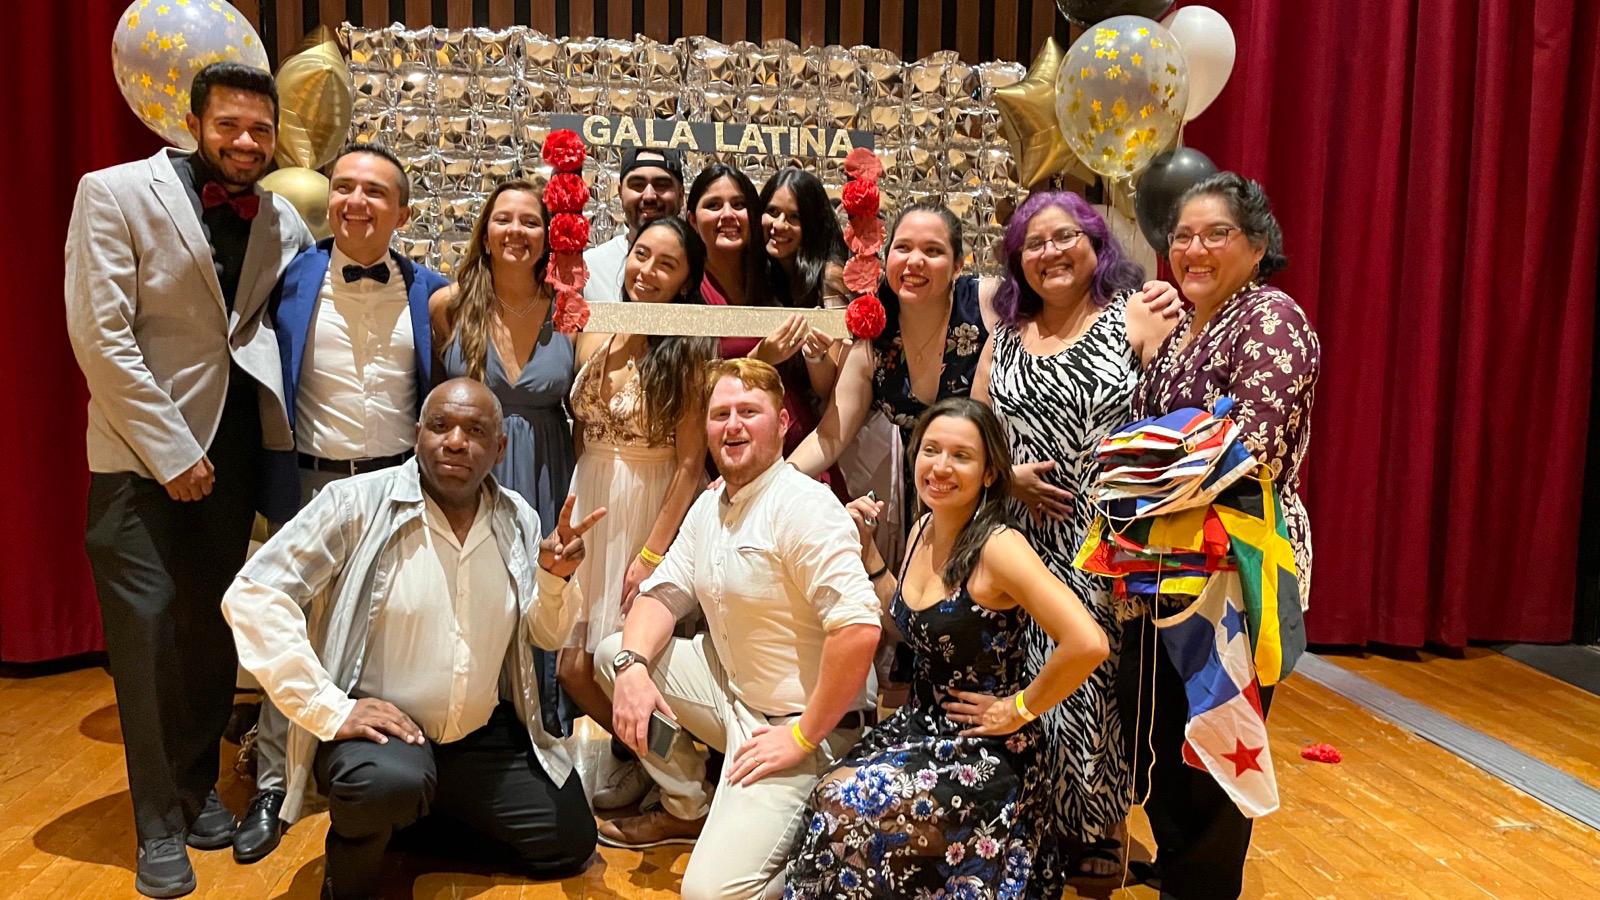 Denisse Molina (center) with Latispánica volunteers and board members at the Gala Latina 2023, the organization’s landmark annual event which was held at Dalhousie University. (Contributed photo)